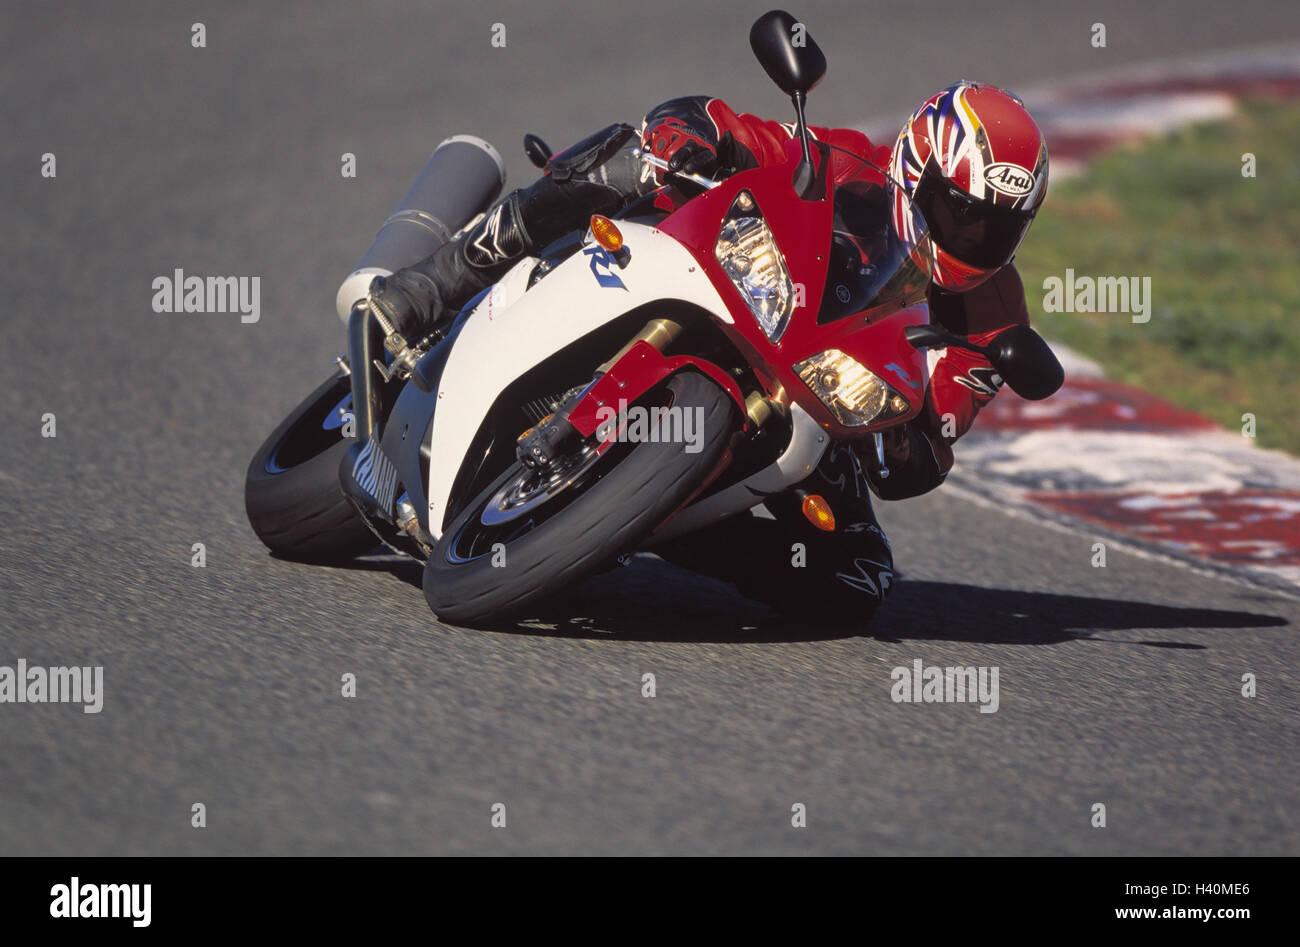 Race track, motorcyclist, bend position, Yamaha R1 only editorially! Motorcycle sport, motorcycle, motor sport, sport, speed, quickness, go, driver, hobby, training, driving training Stock Photo